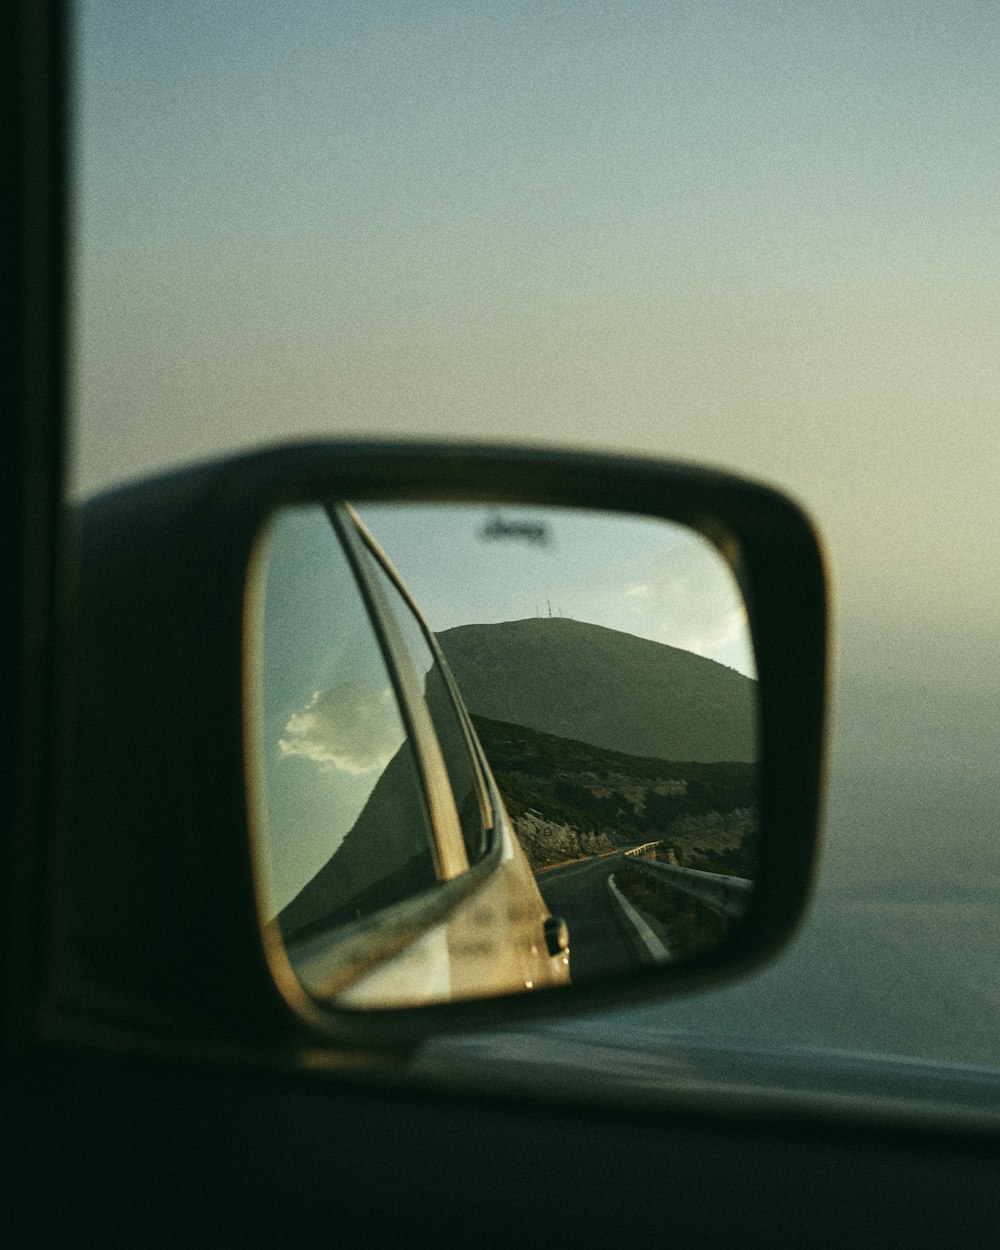 car side mirror showing car on road during daytime